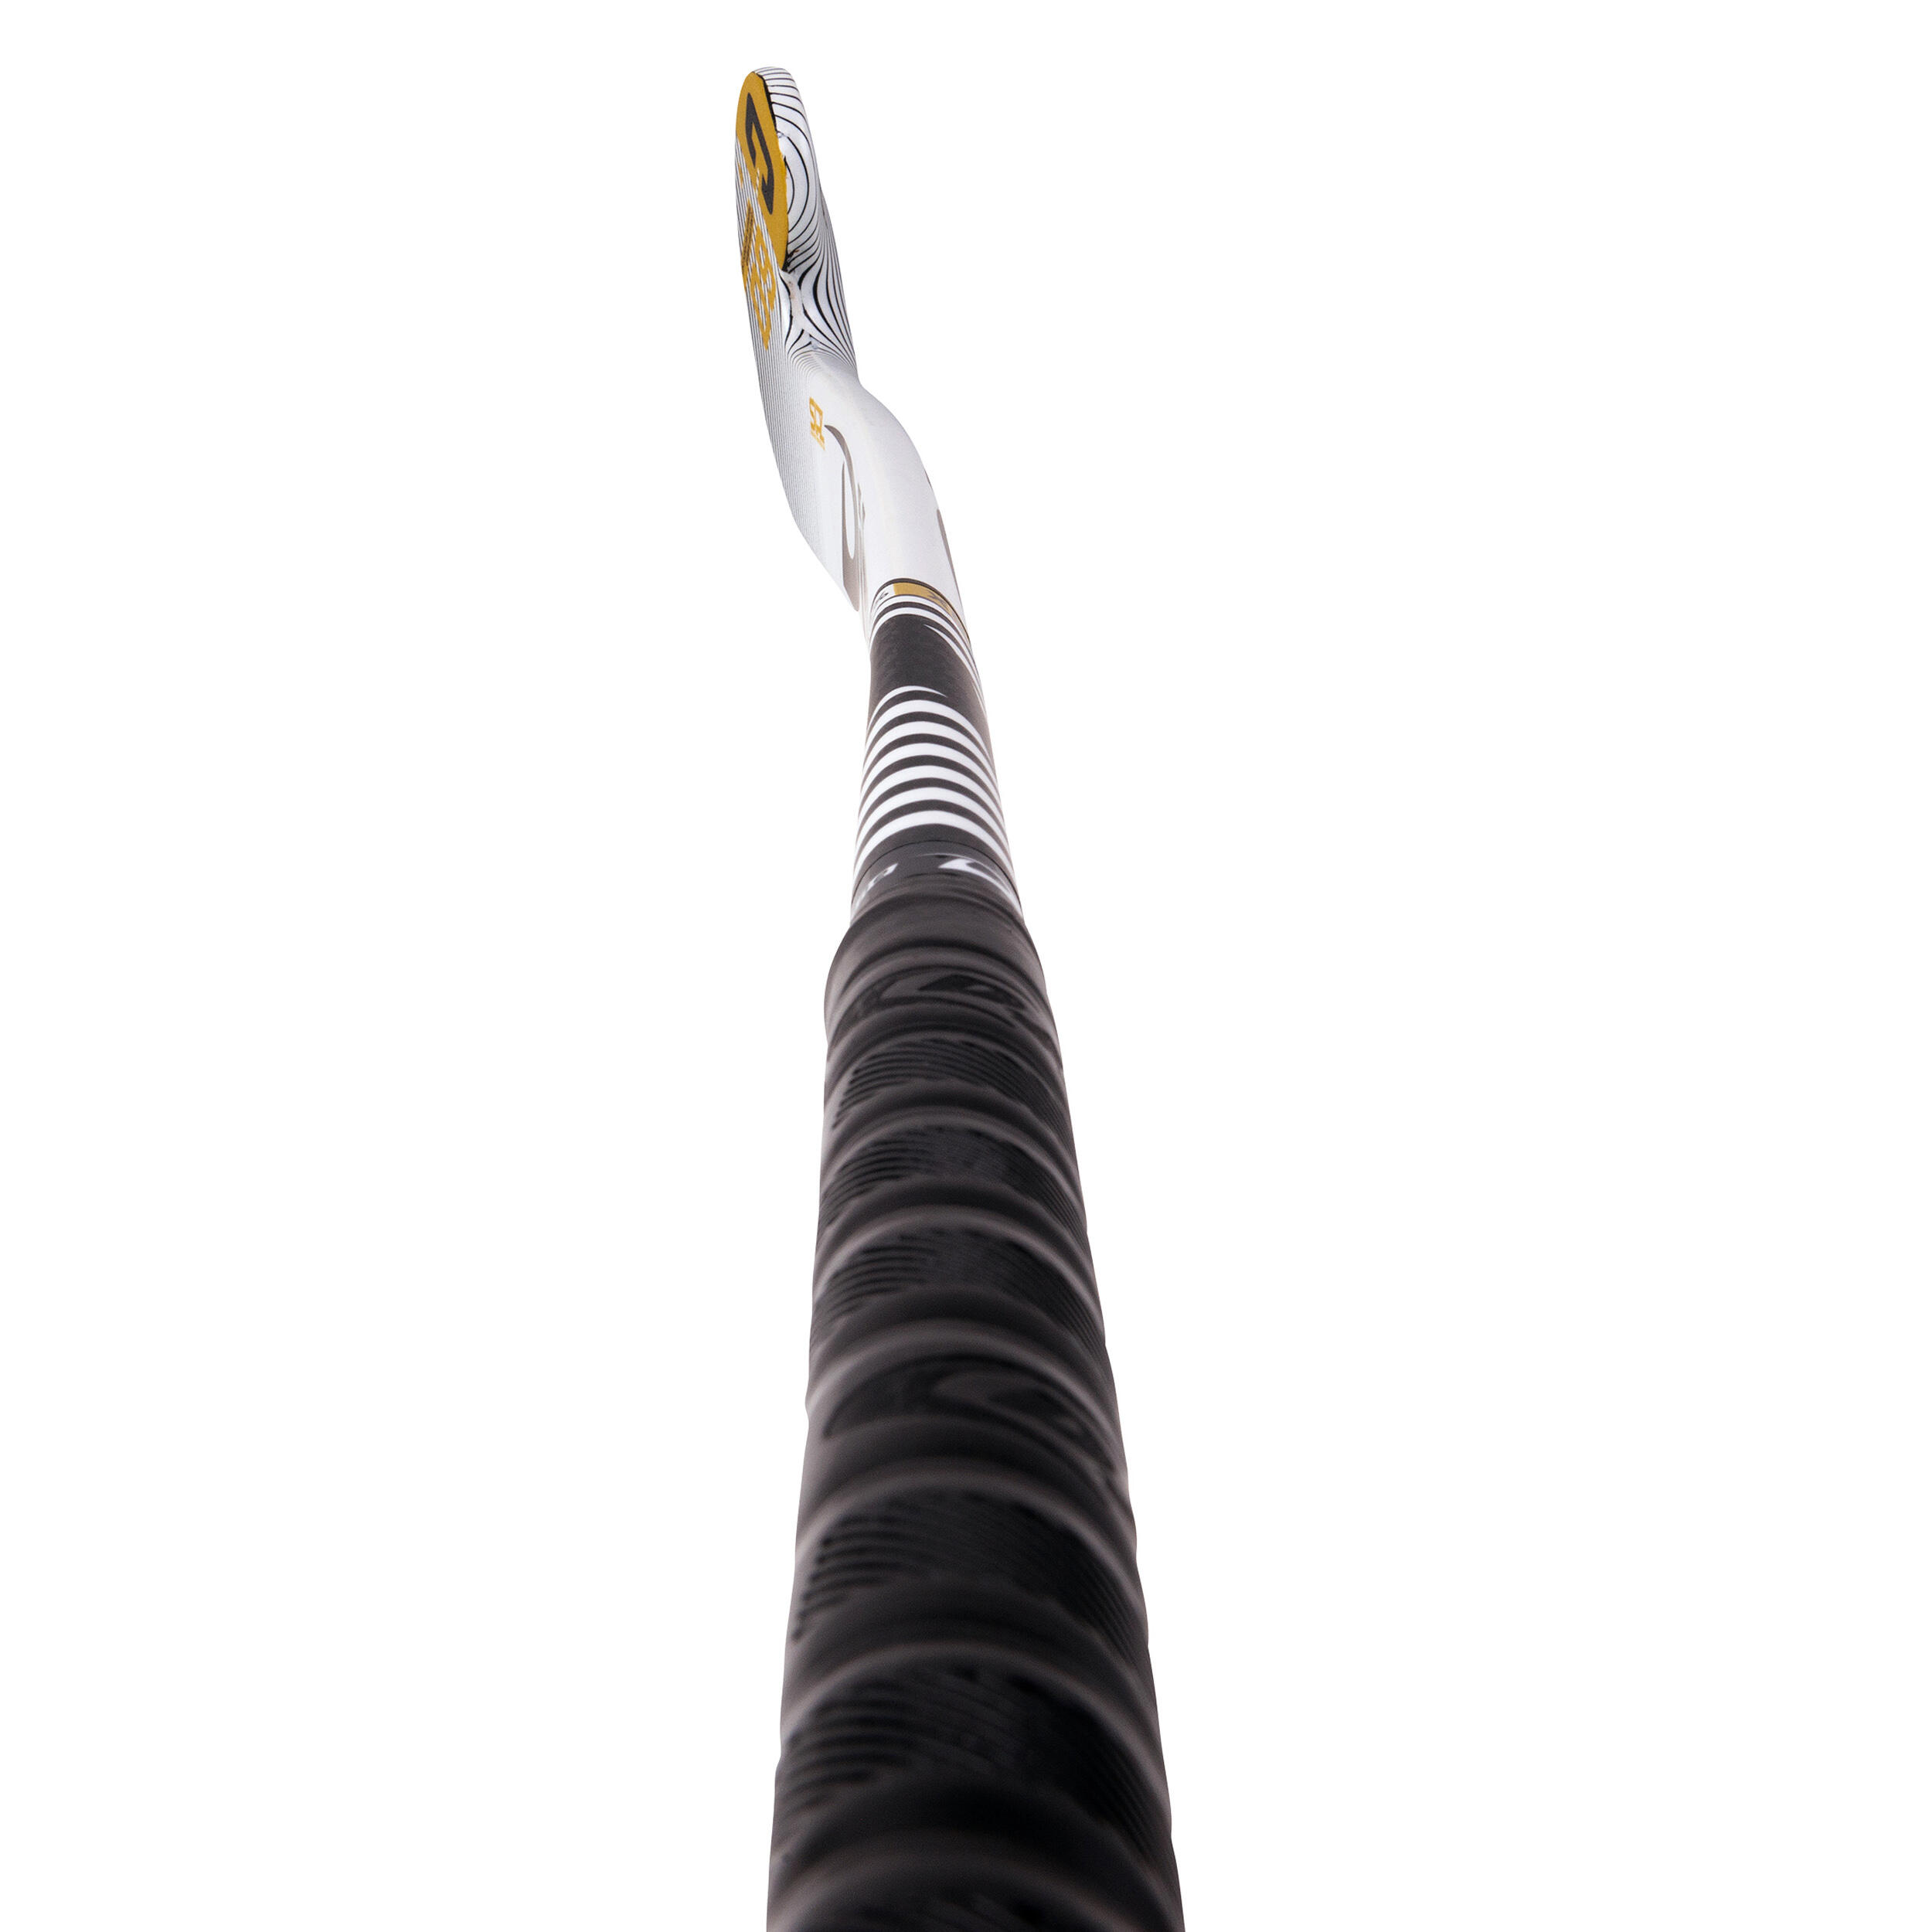 Adult Field Hockey Advanced 60% Carbon X-Low Bow Stick CompotecC60 - White/Black 10/12